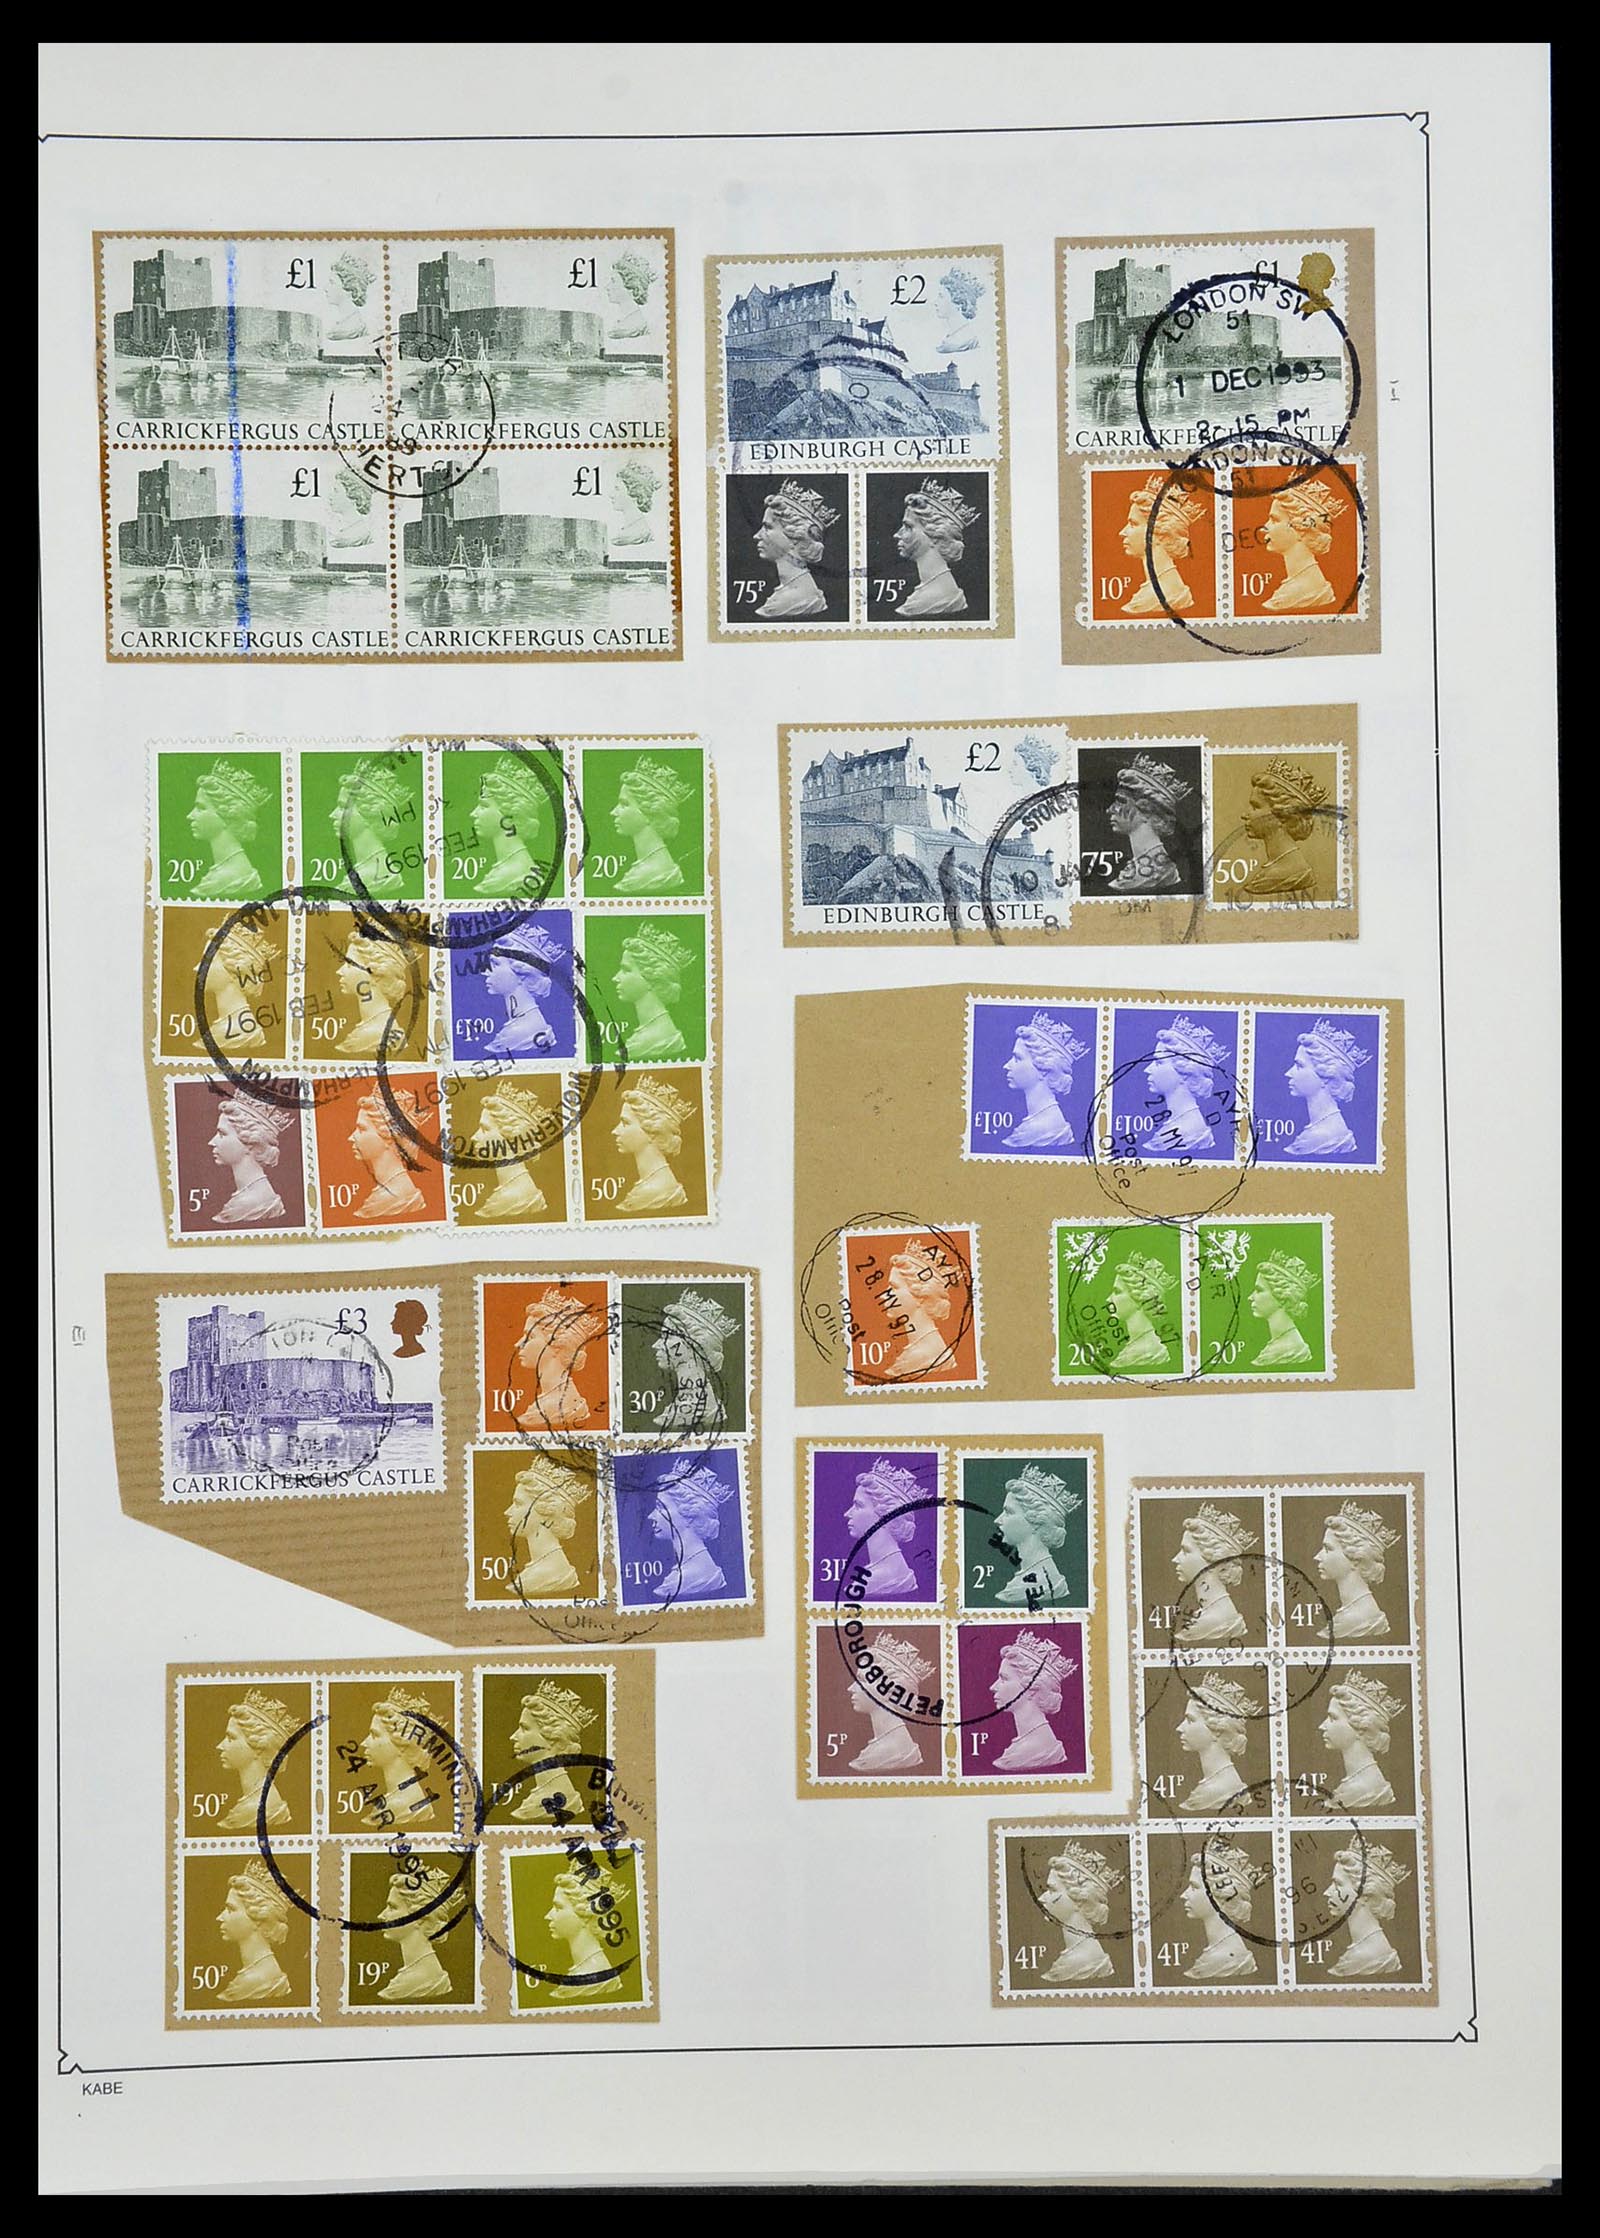 34221 177 - Stamp collection 34221 Great Britain Machins/castles 1971-2005.